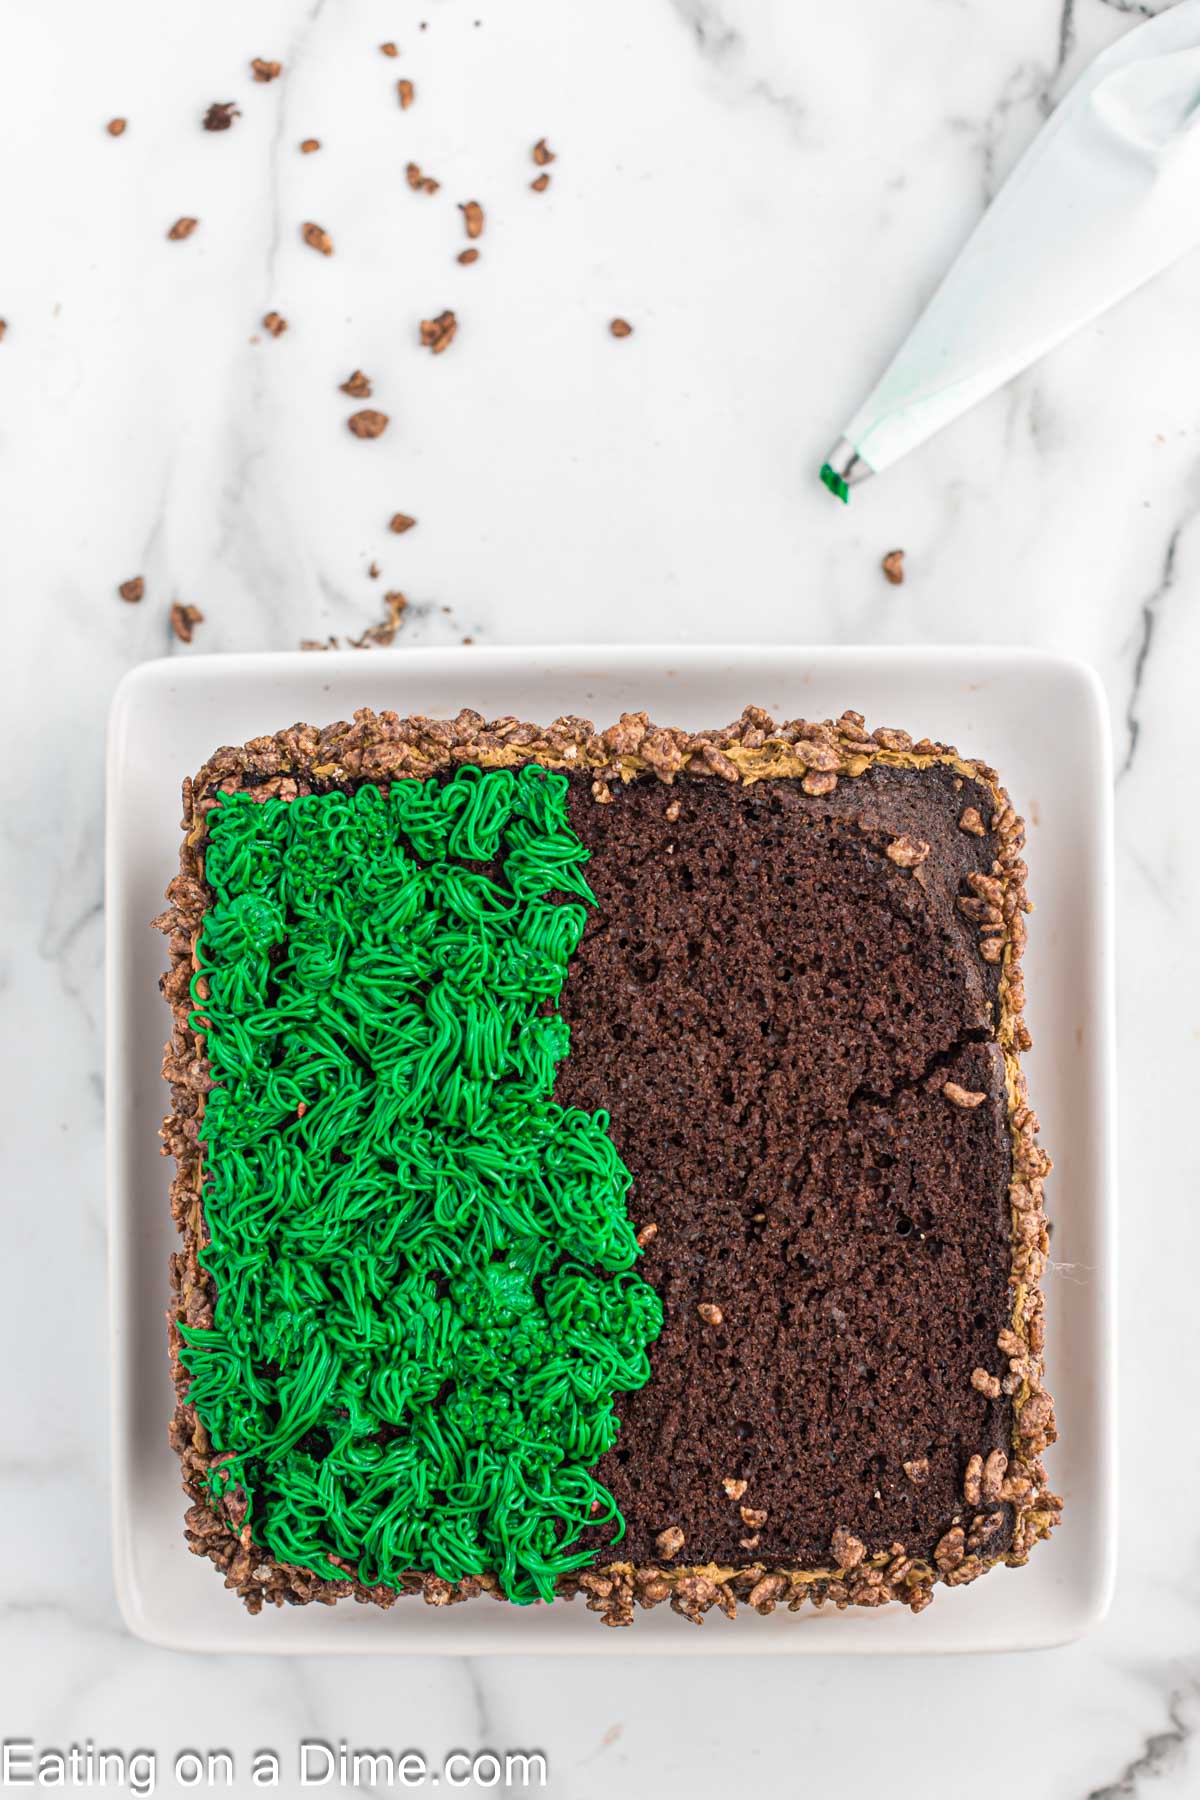 Topping the cake with the green frosting